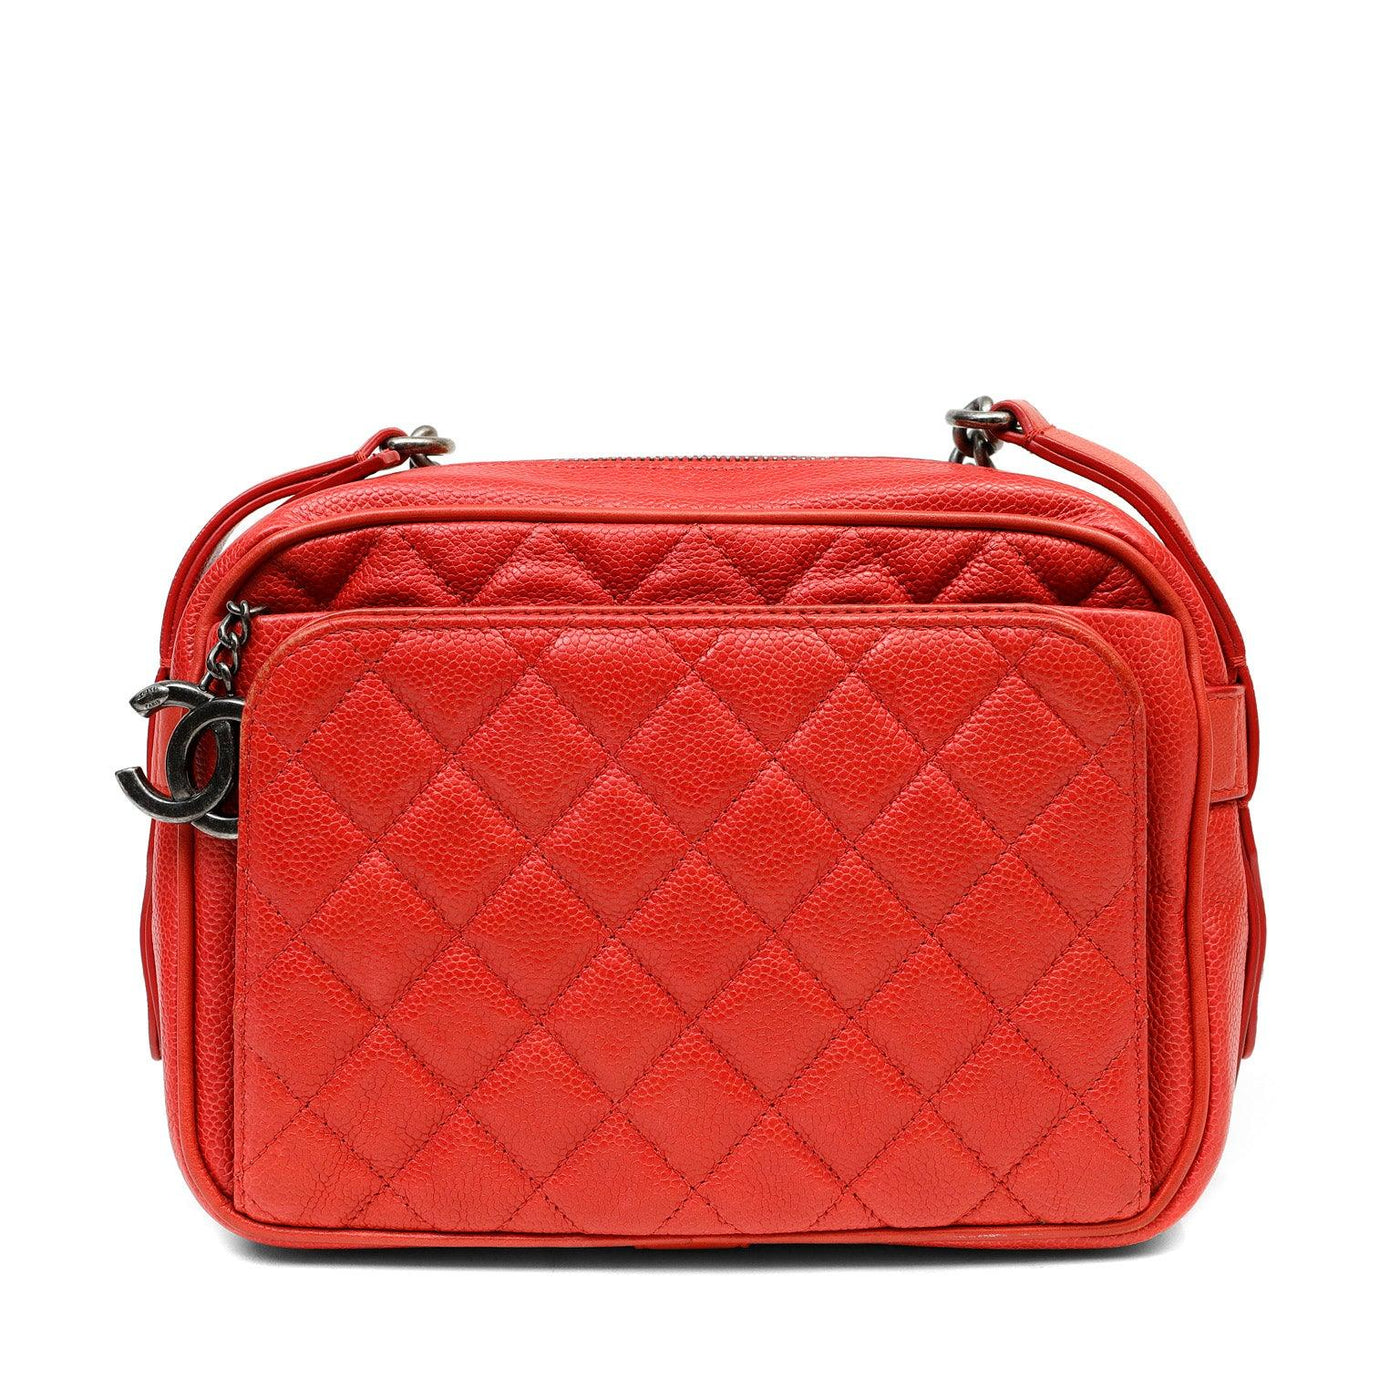 Chanel Red Caviar Leather Crossbody Bag - Only Authentics